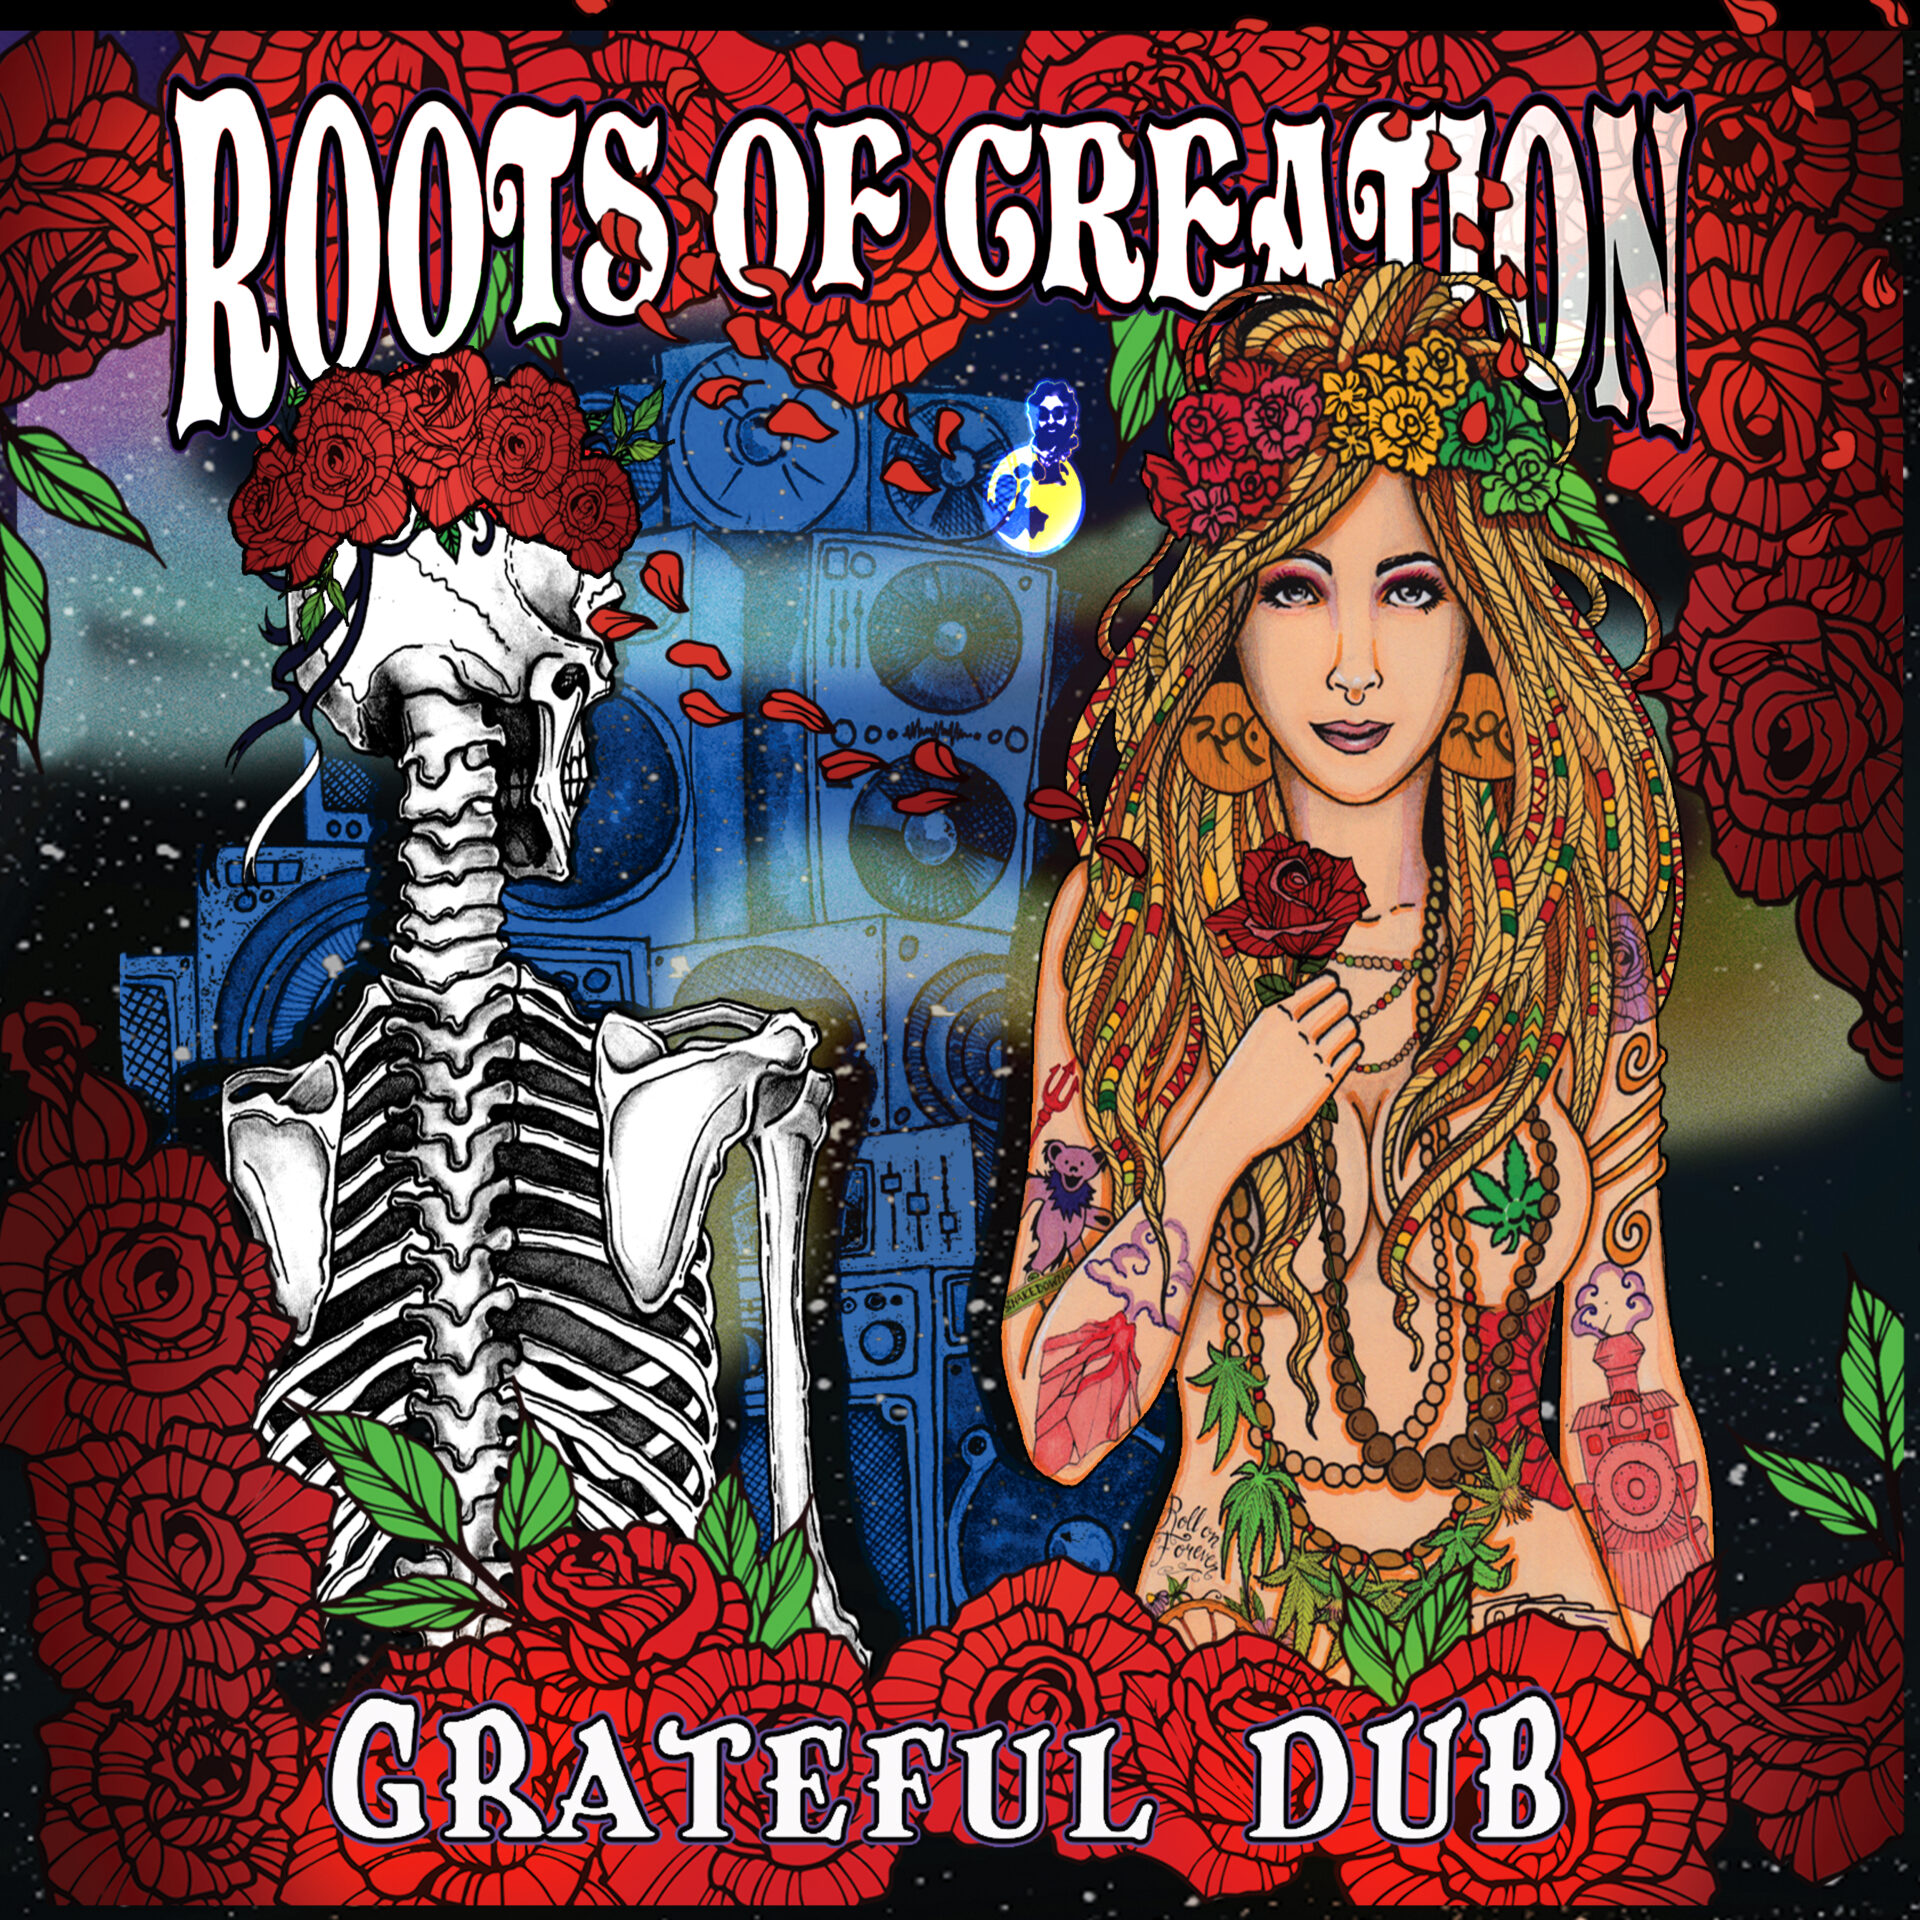 Roots of Creation celebrates 50 years of The Grateful Dead